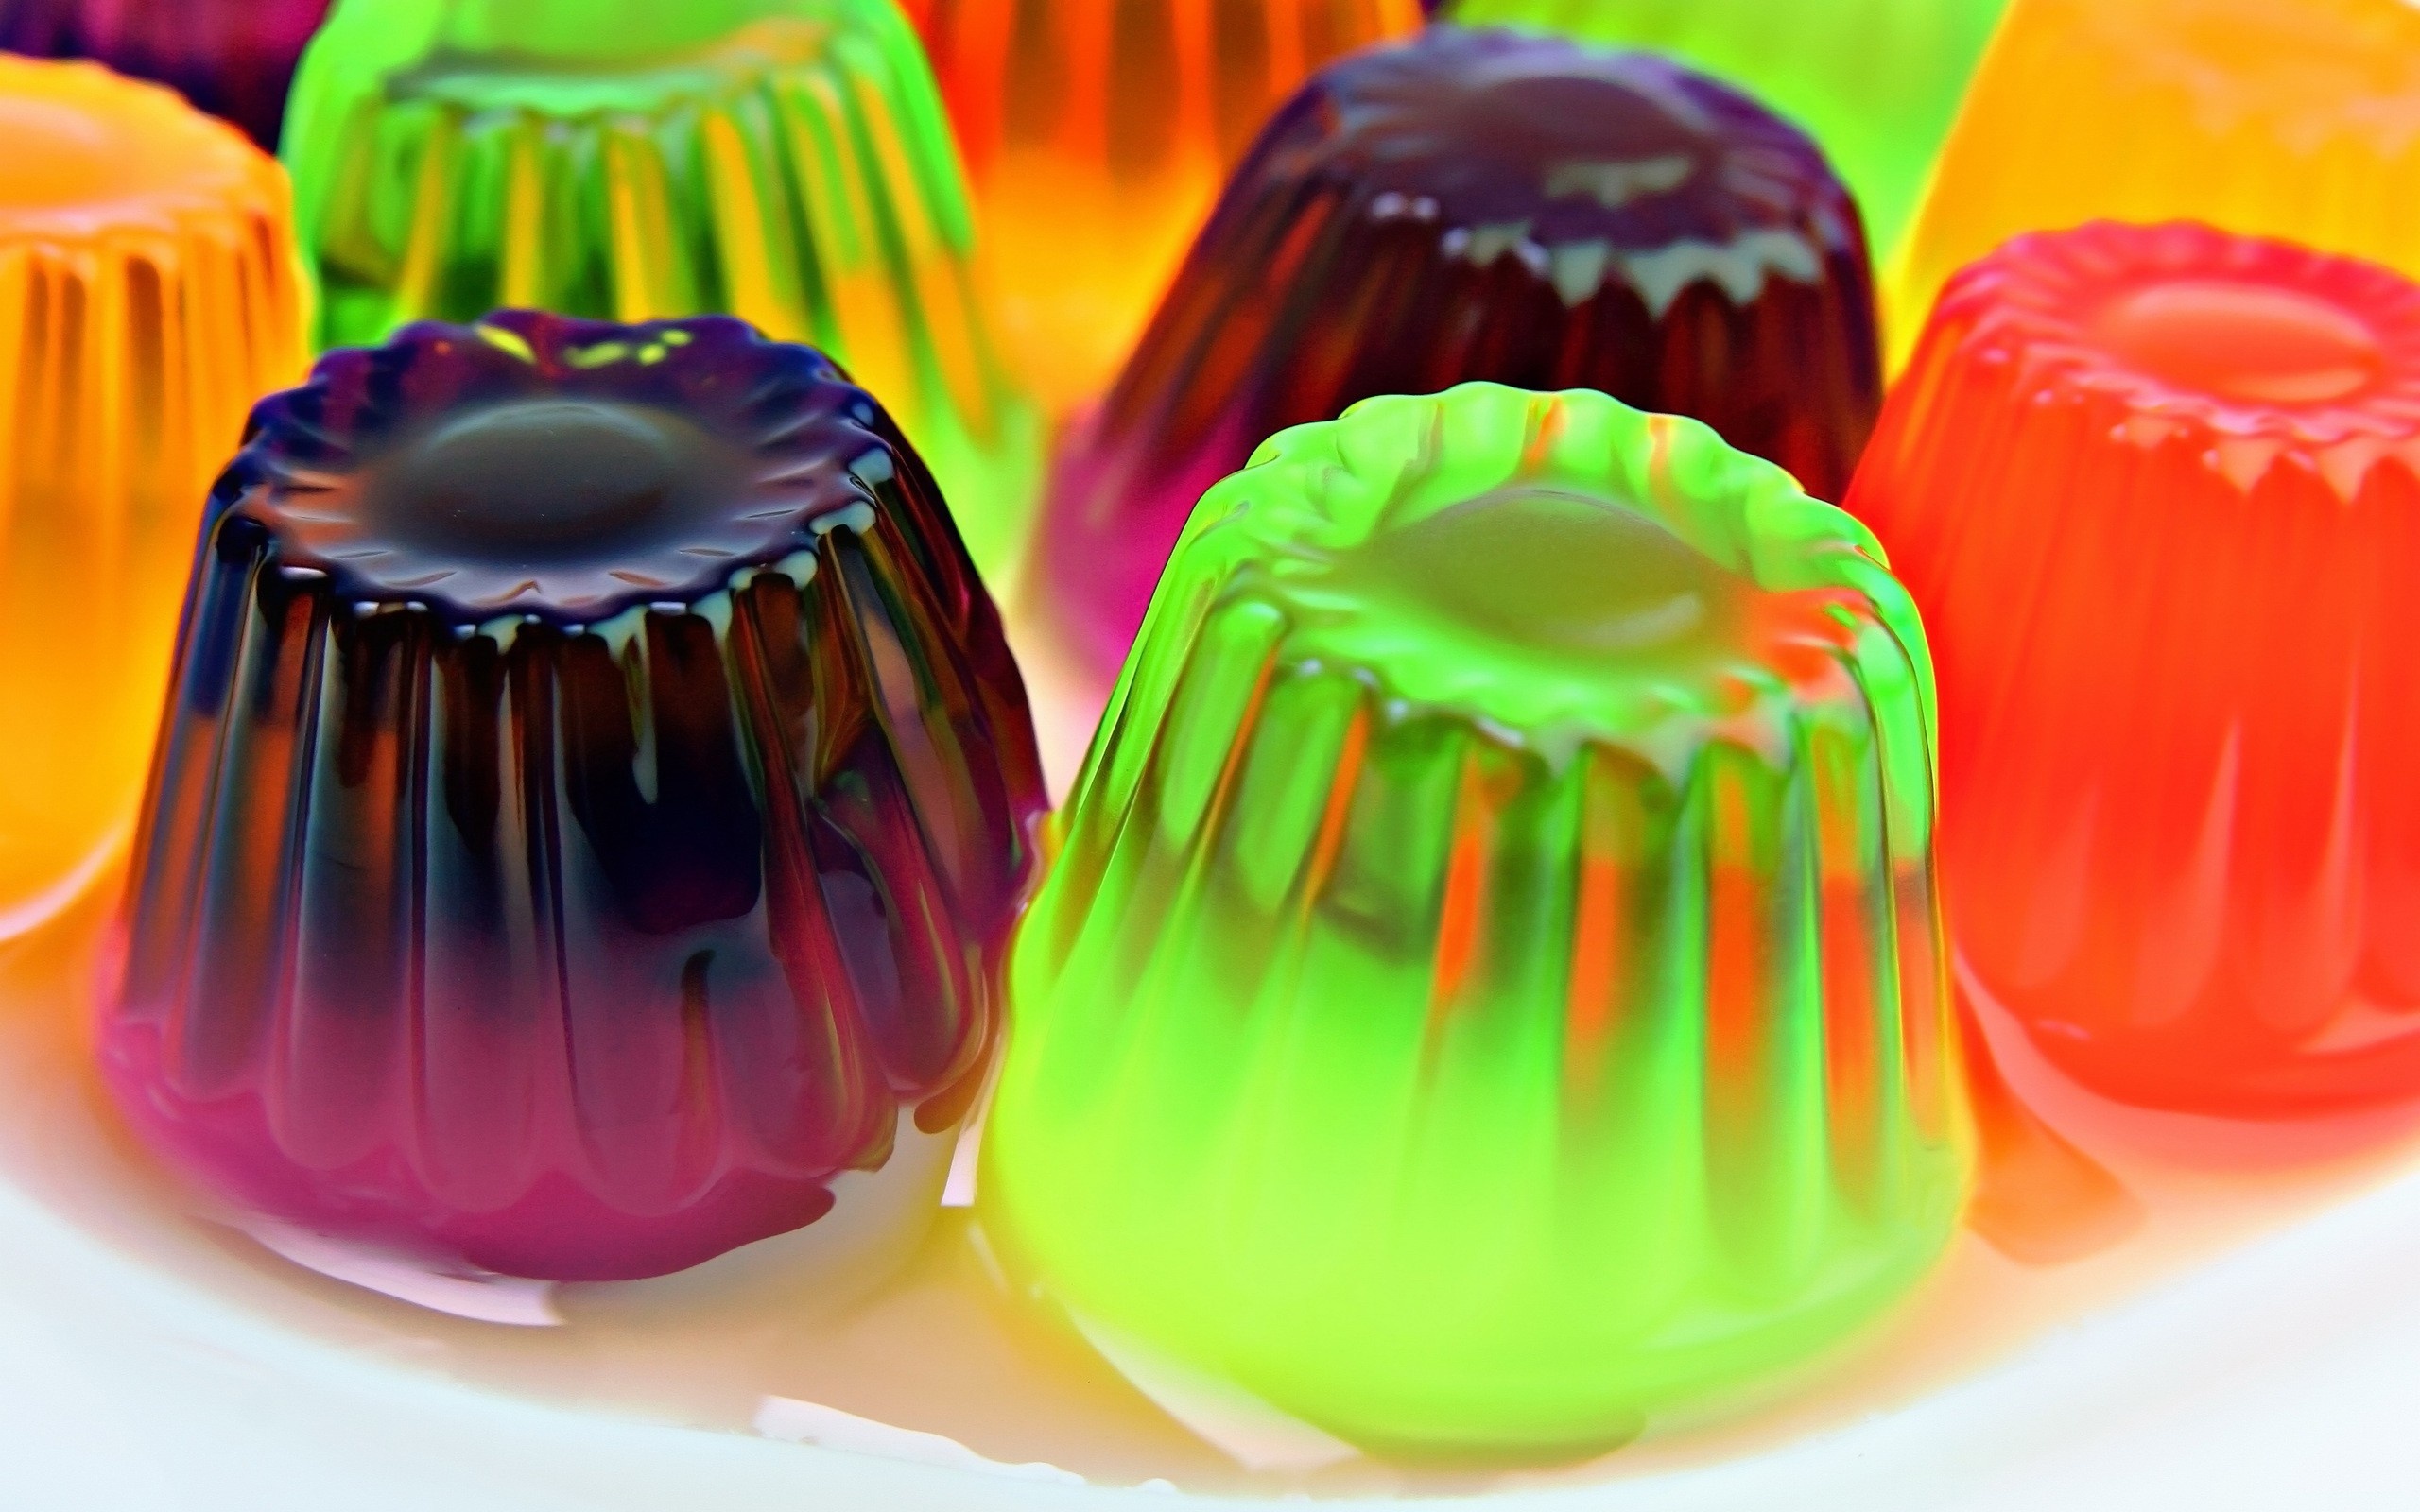 Gelatinous delight, Mouthwatering jelly, Jelly bean array, Sugary delight, 2560x1600 HD Desktop